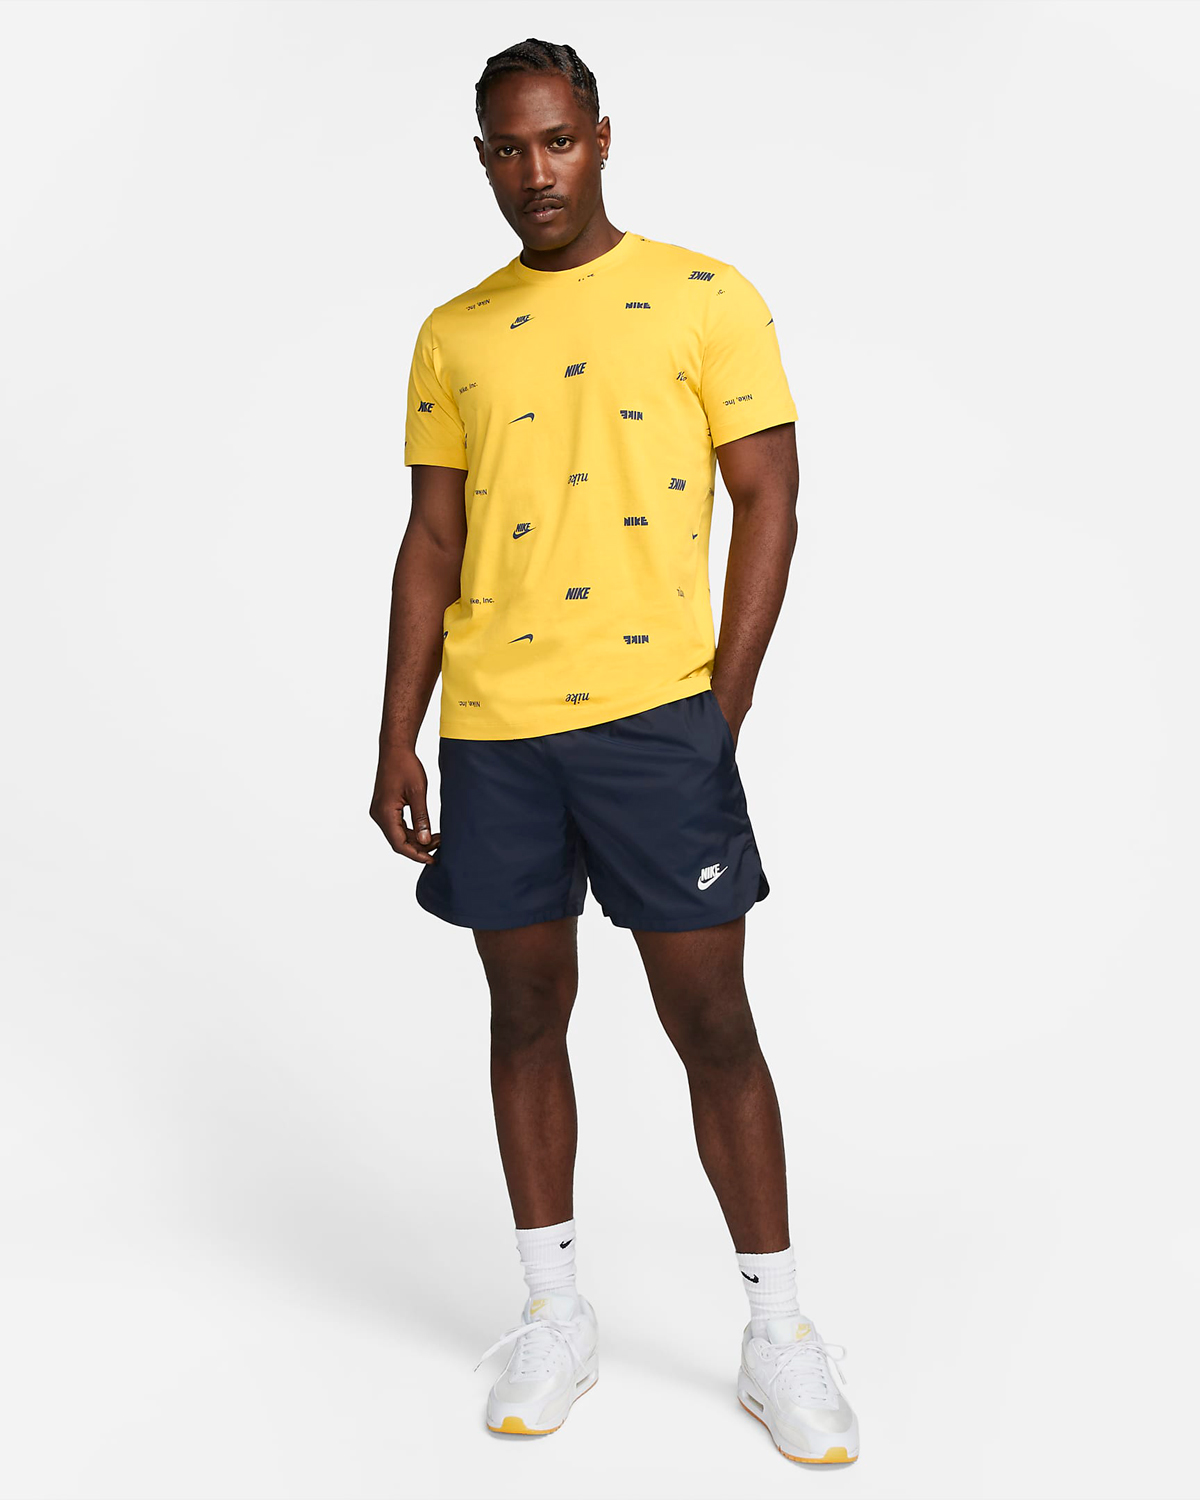 Nike-Club-Allover-Print-T-Shirt-Vivid-Sulfur-Midnight-Navy-Outfit